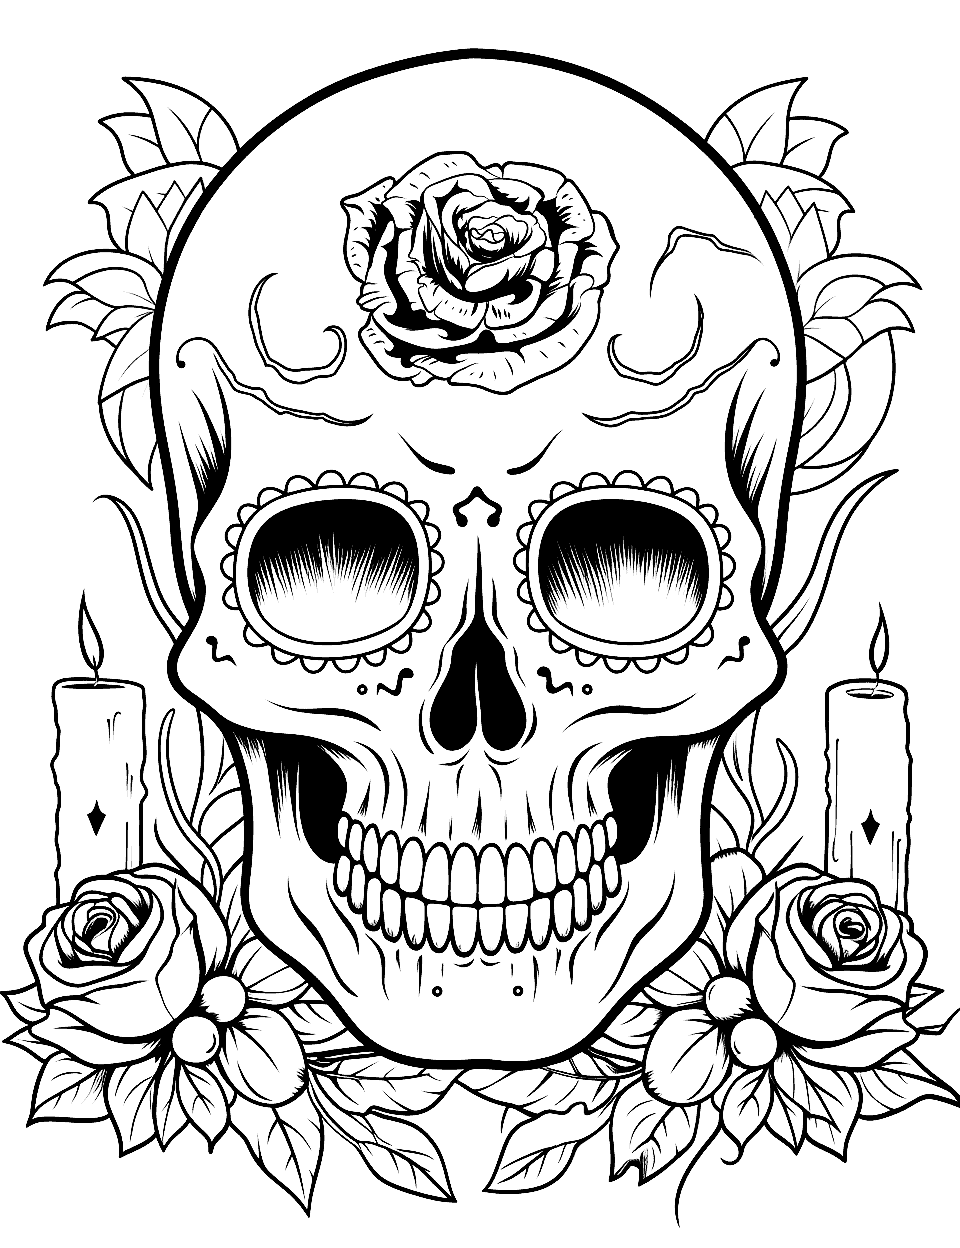 Dia de los Muertos Altar Coloring Page - A skull as part of an altar setup, with candles.